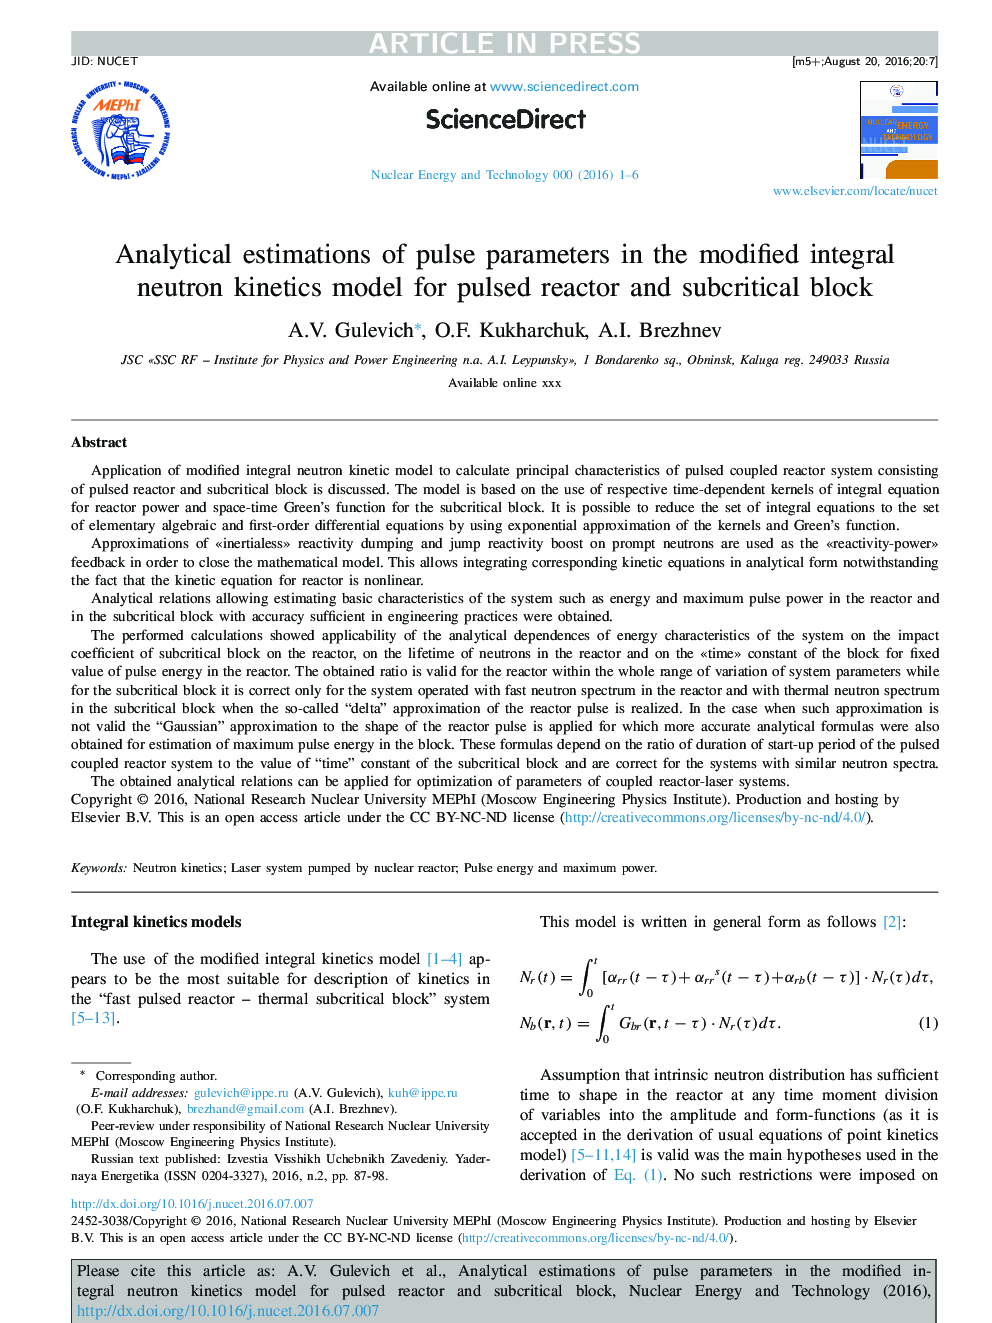 Analytical estimations of pulse parameters in the modified integral neutron kinetics model for pulsed reactor and subcritical block